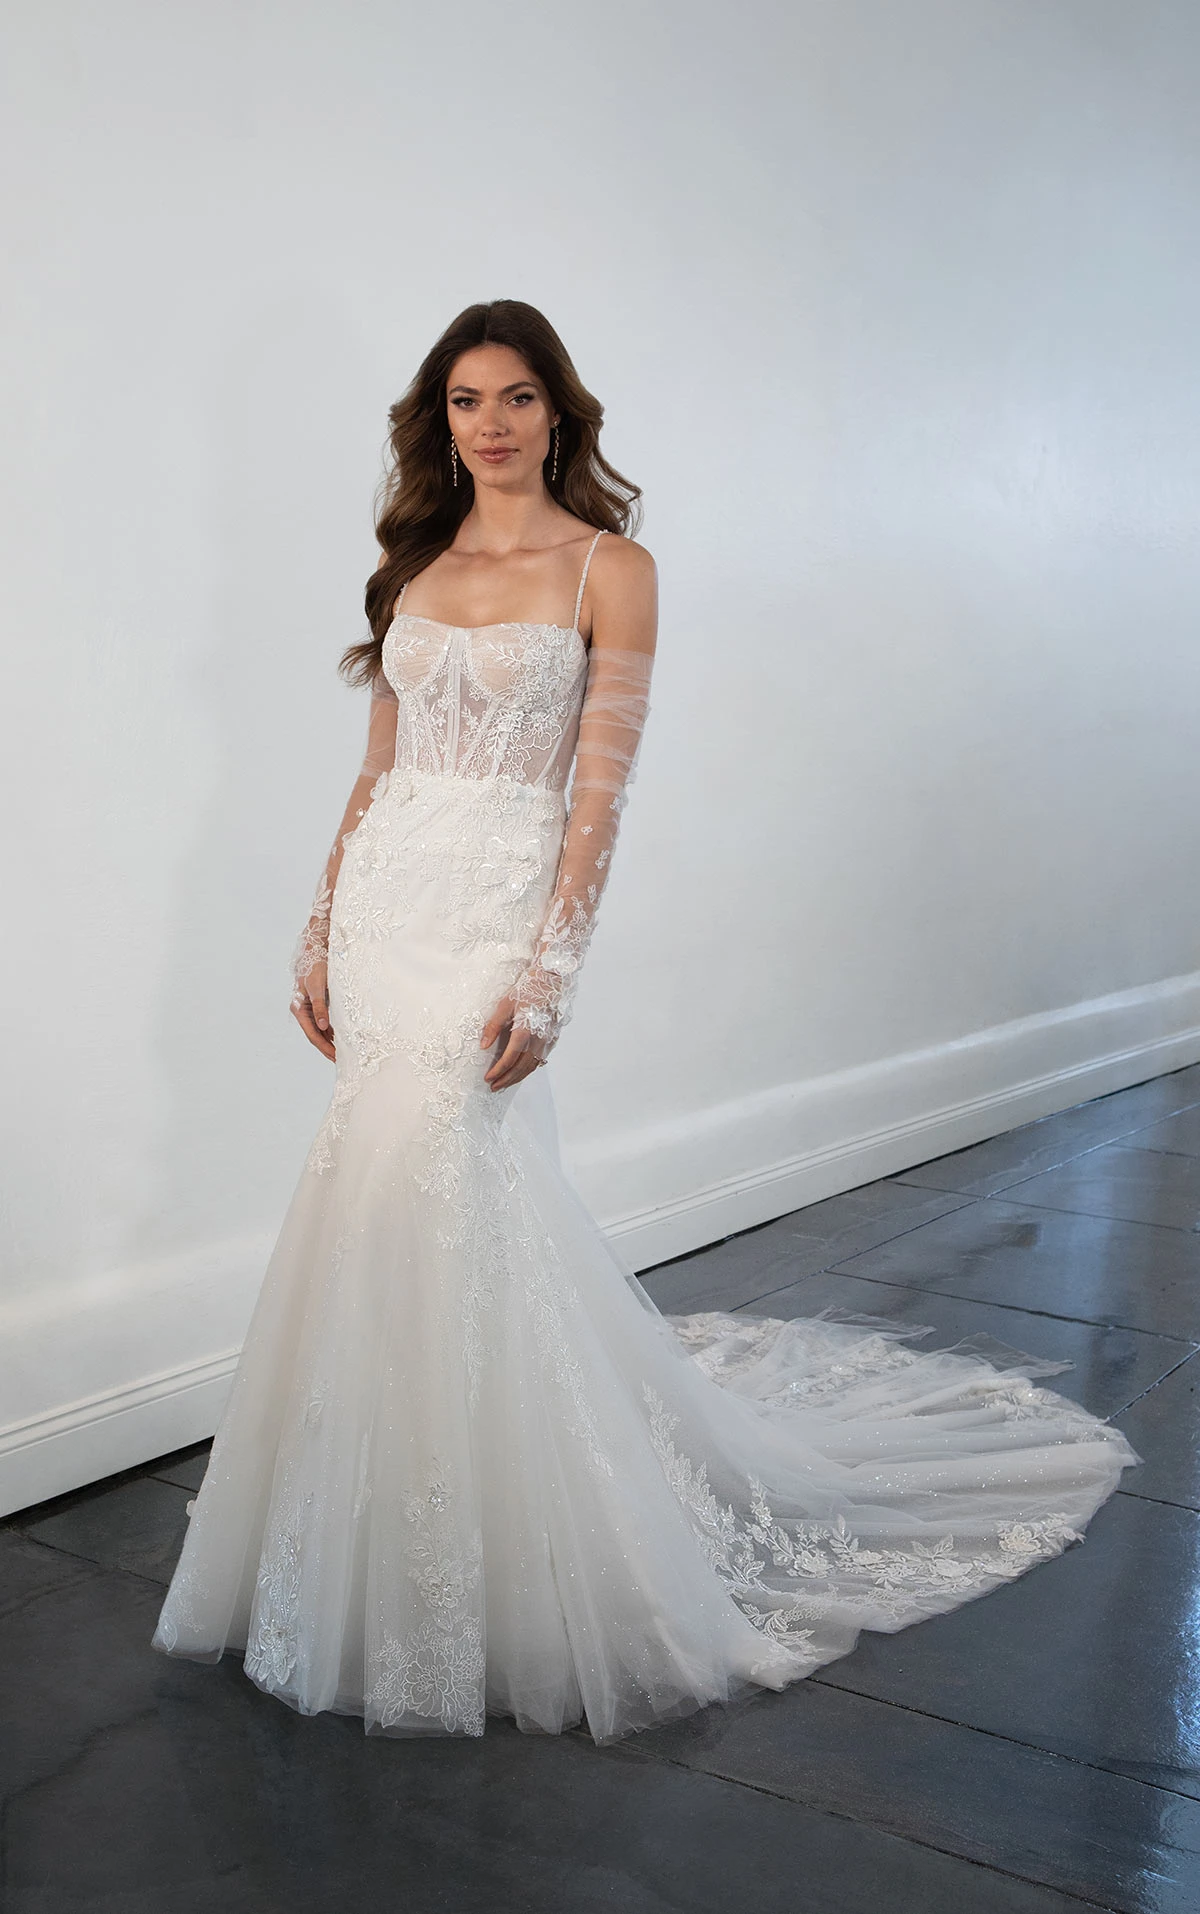 1488 Sparkling Lace Spaghetti Strap Wedding Dress with Corset Bustier Bodice  by Martina Liana